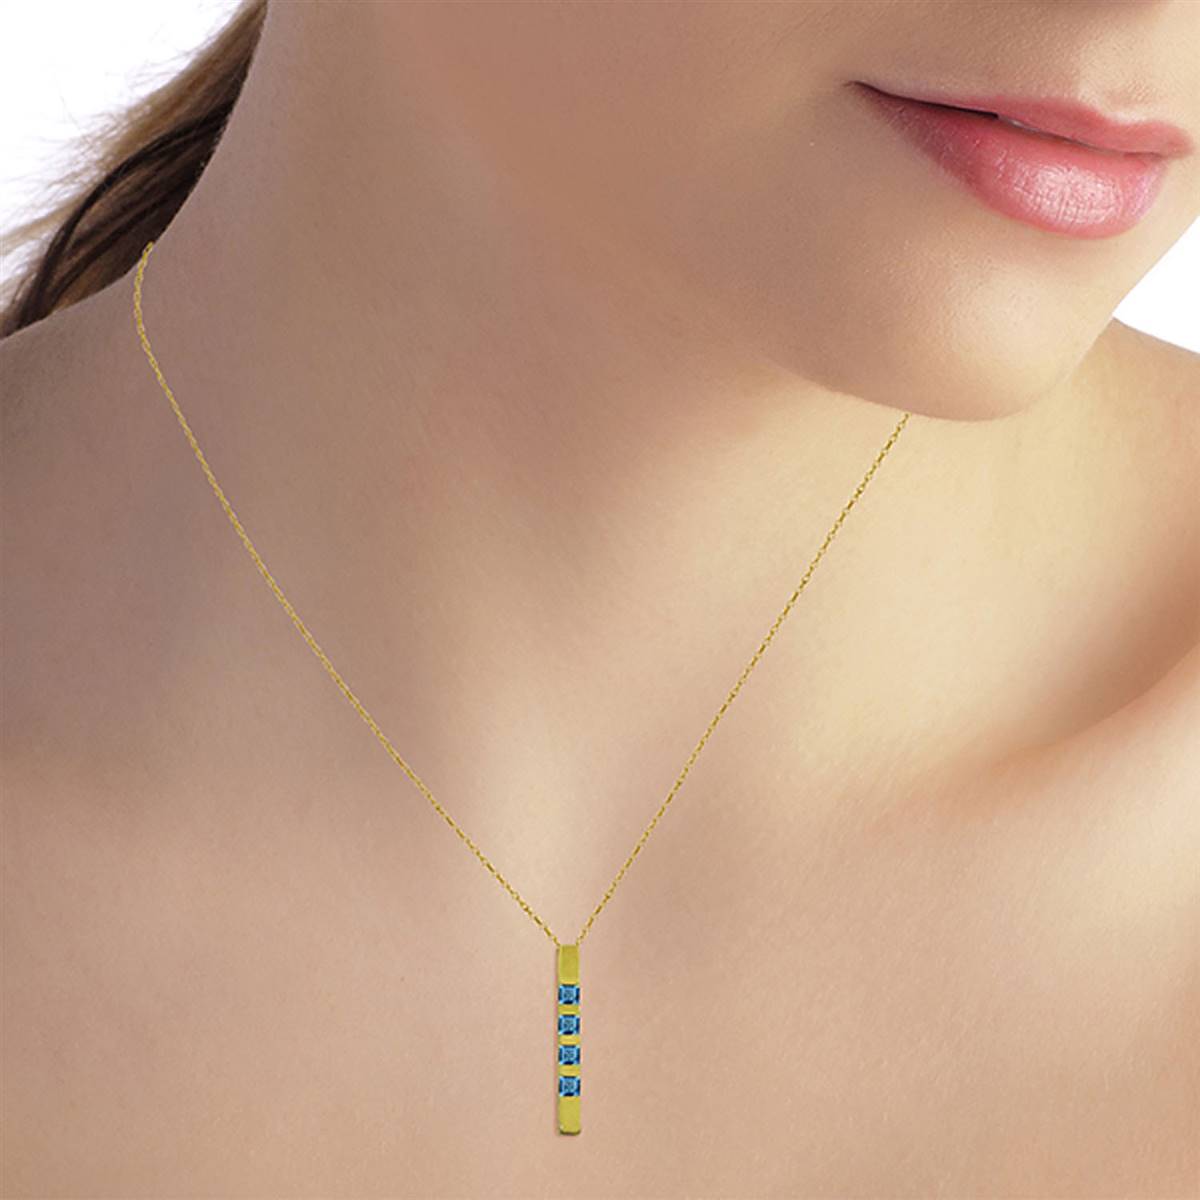 0.35 Carat 14K Solid Yellow Gold Necklace Bar Natural Blue Topaz